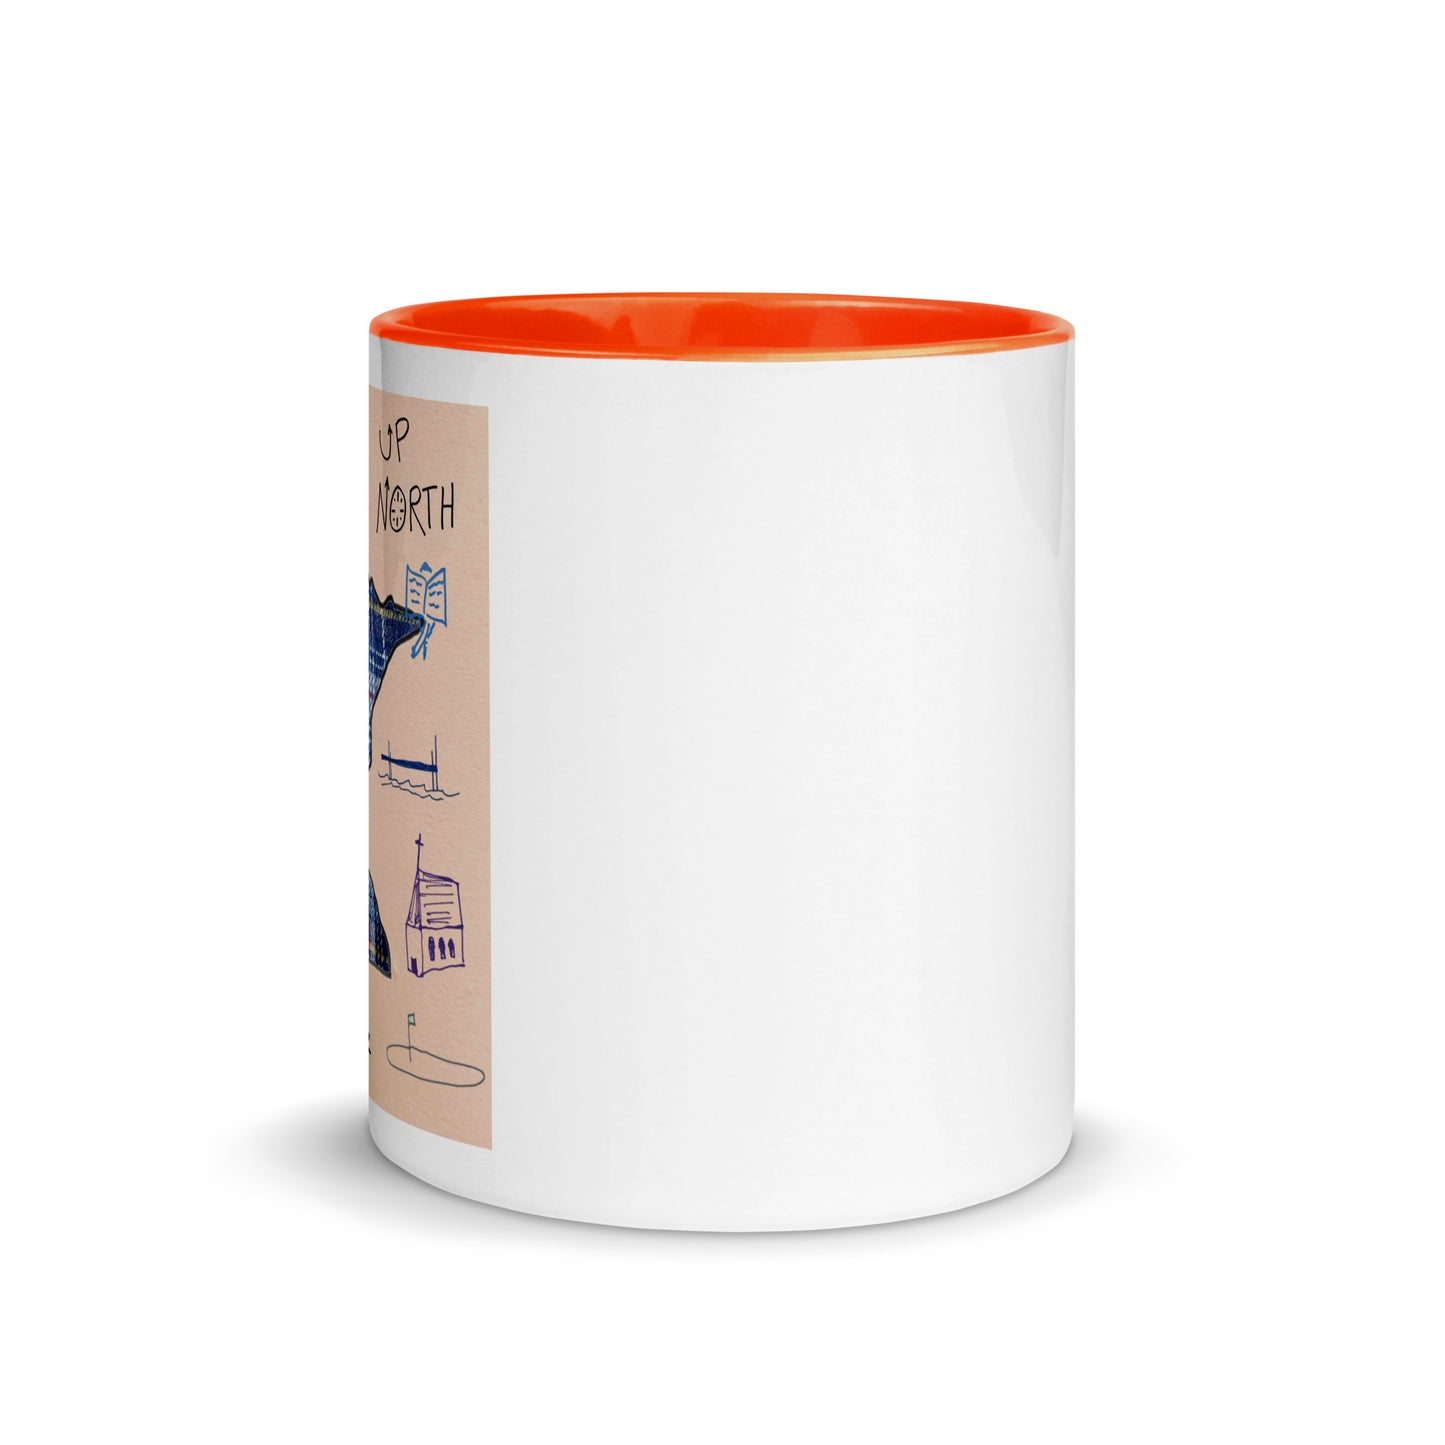 Mug with Color Inside Up North Cover